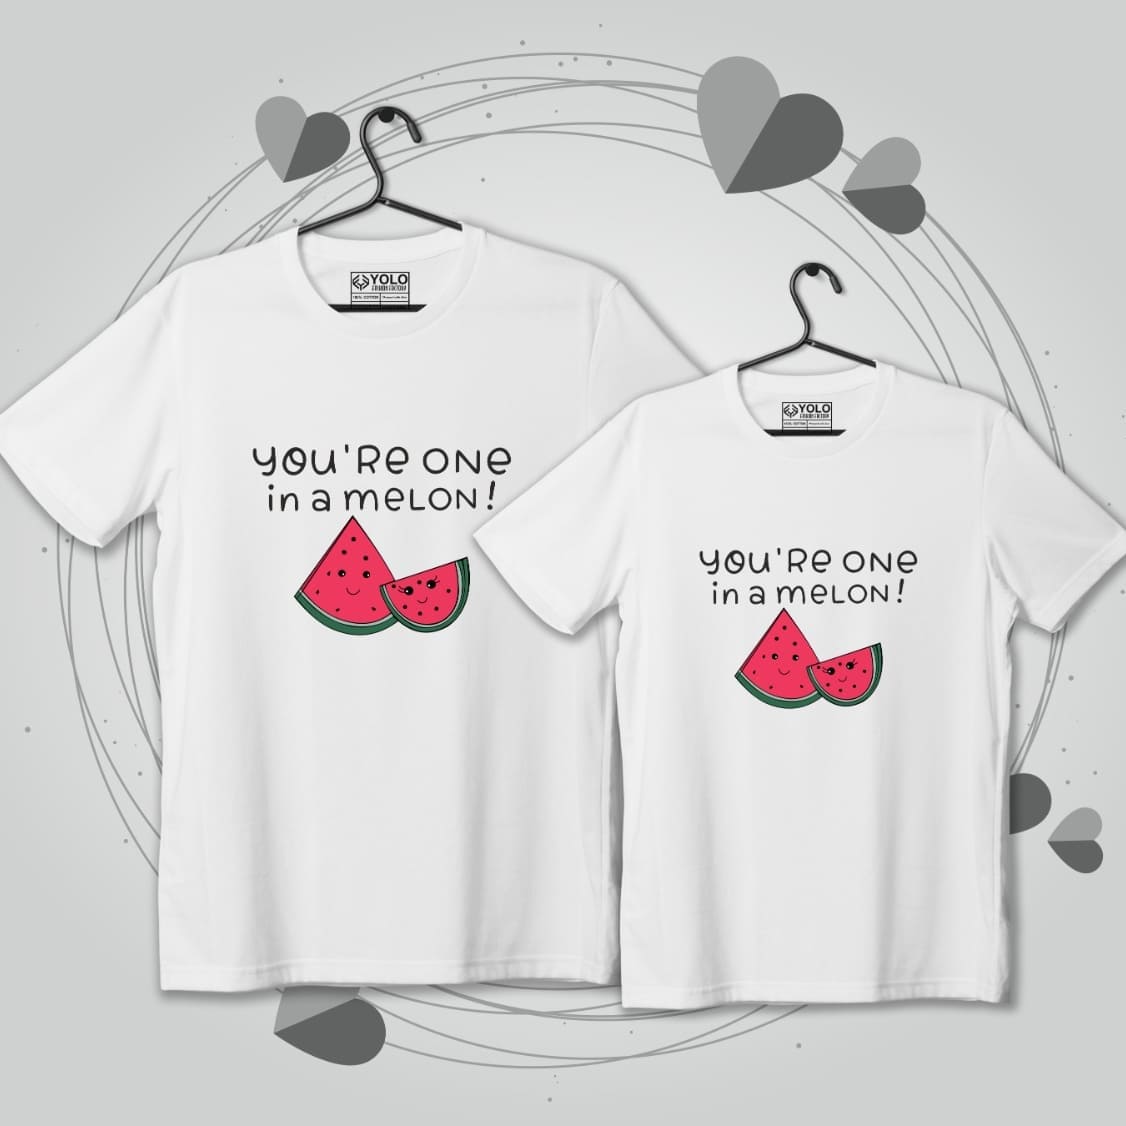 One in a melon 🍉💞
Customized couples T-shirts
.
.
.
For details
Contact us : 97505 97508 ; 04562-356983
.
.
.
#oneinamelon #couples #couplestees #couplesfashion #couplescollection #couplesgoals #couplesgift #customizedtshirts #cotton_tshirt #tshirtfashion #yolofashionfactory